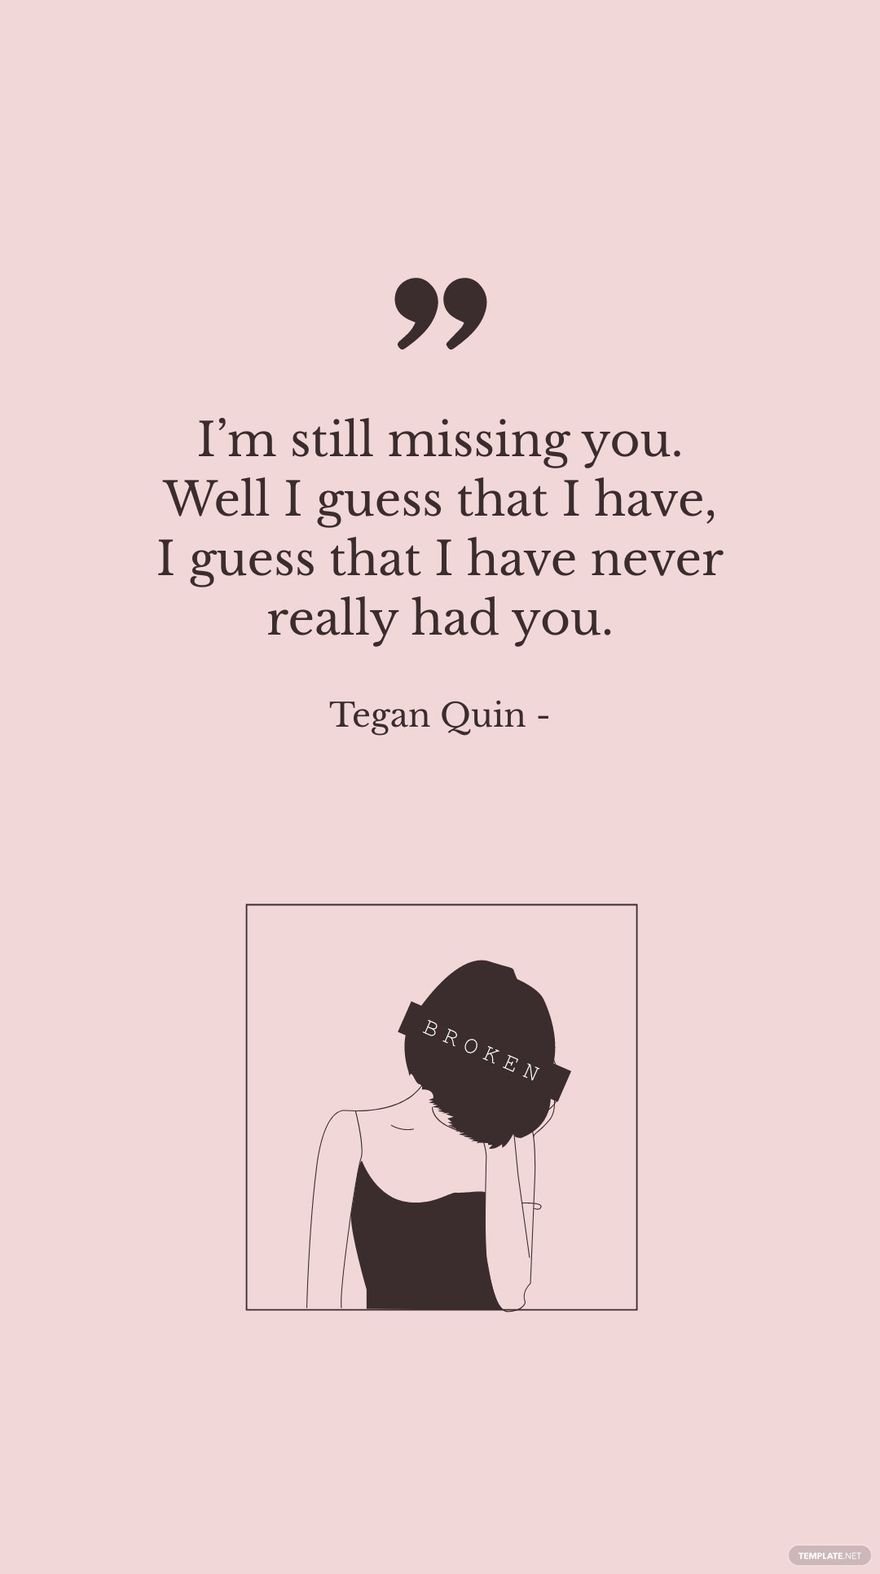 Tegan Quin - I’m still missing you. Well I guess that I have, I guess that I have never really had you. in JPG